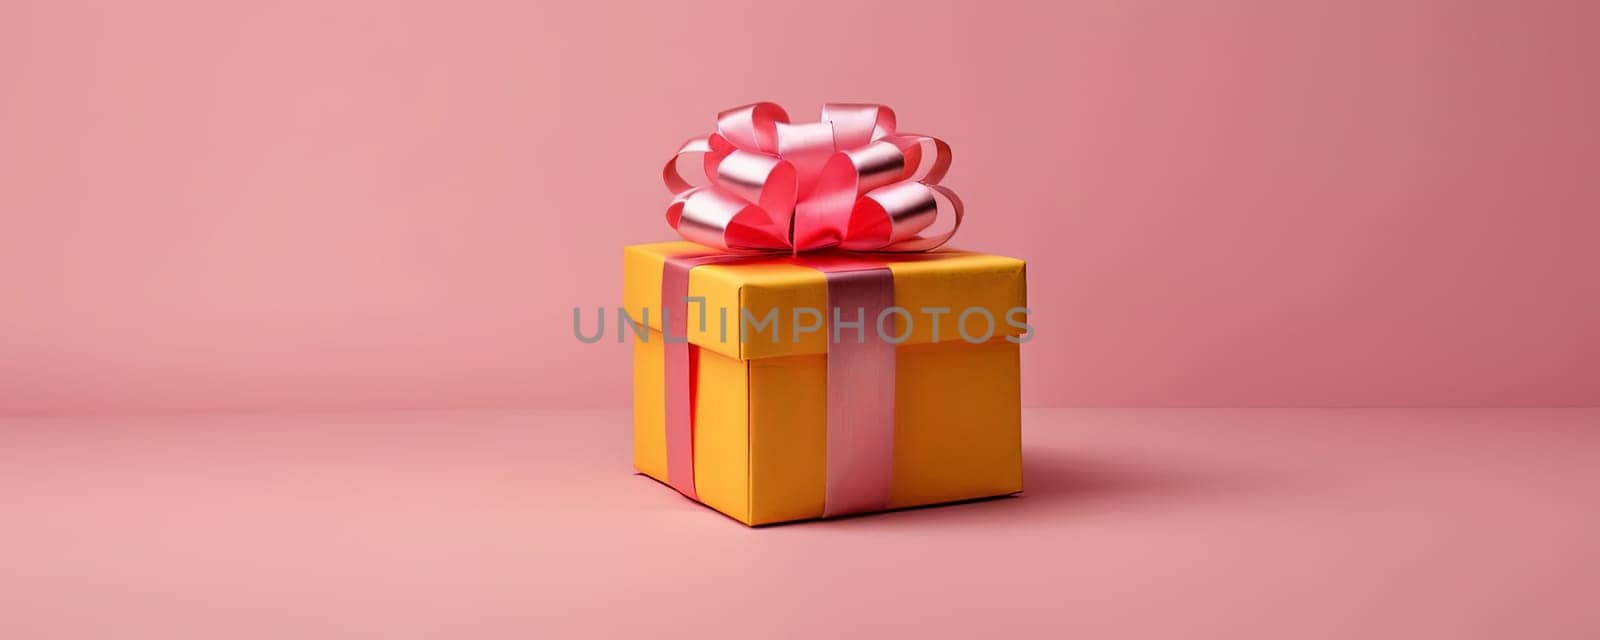 Gift boxes with red ribbons, white surface, teal background, celebration, gifting opportunity.